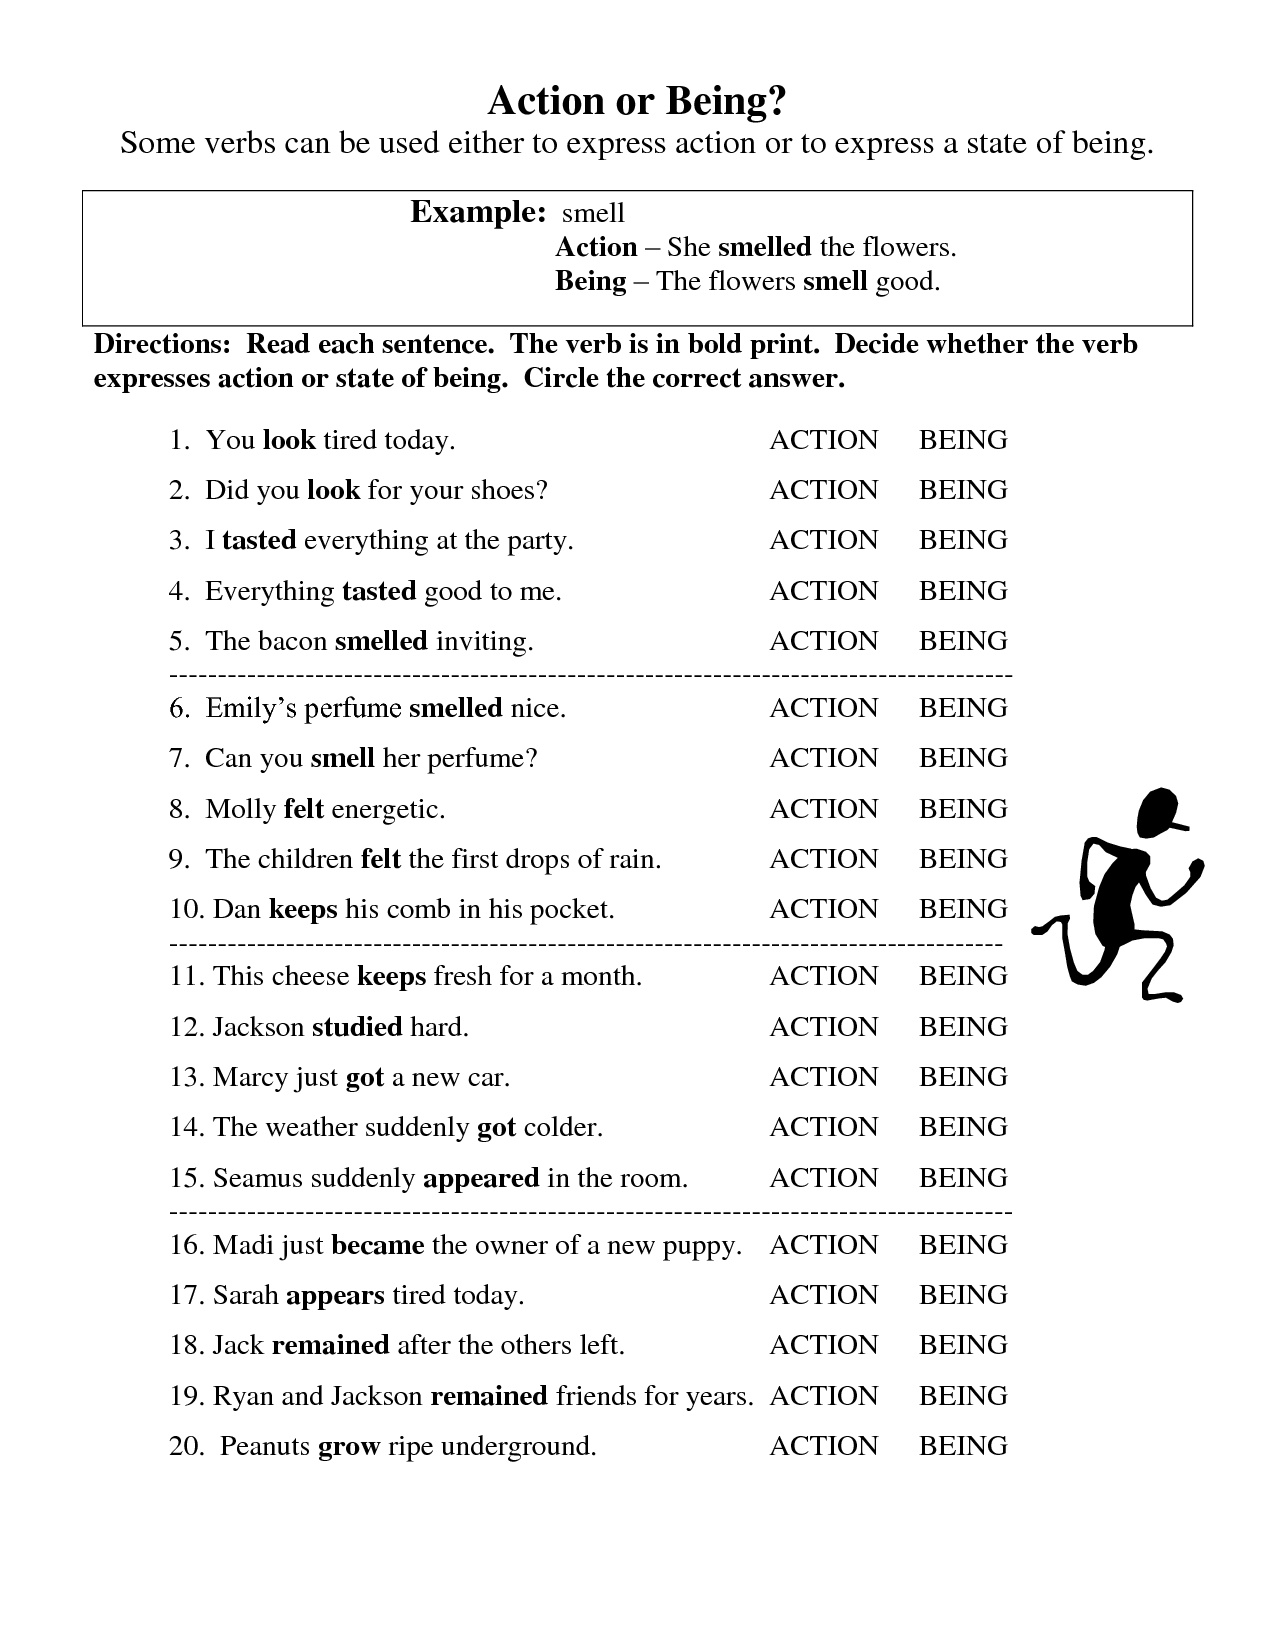 Worksheet On Linking Verbs And Action Verbs